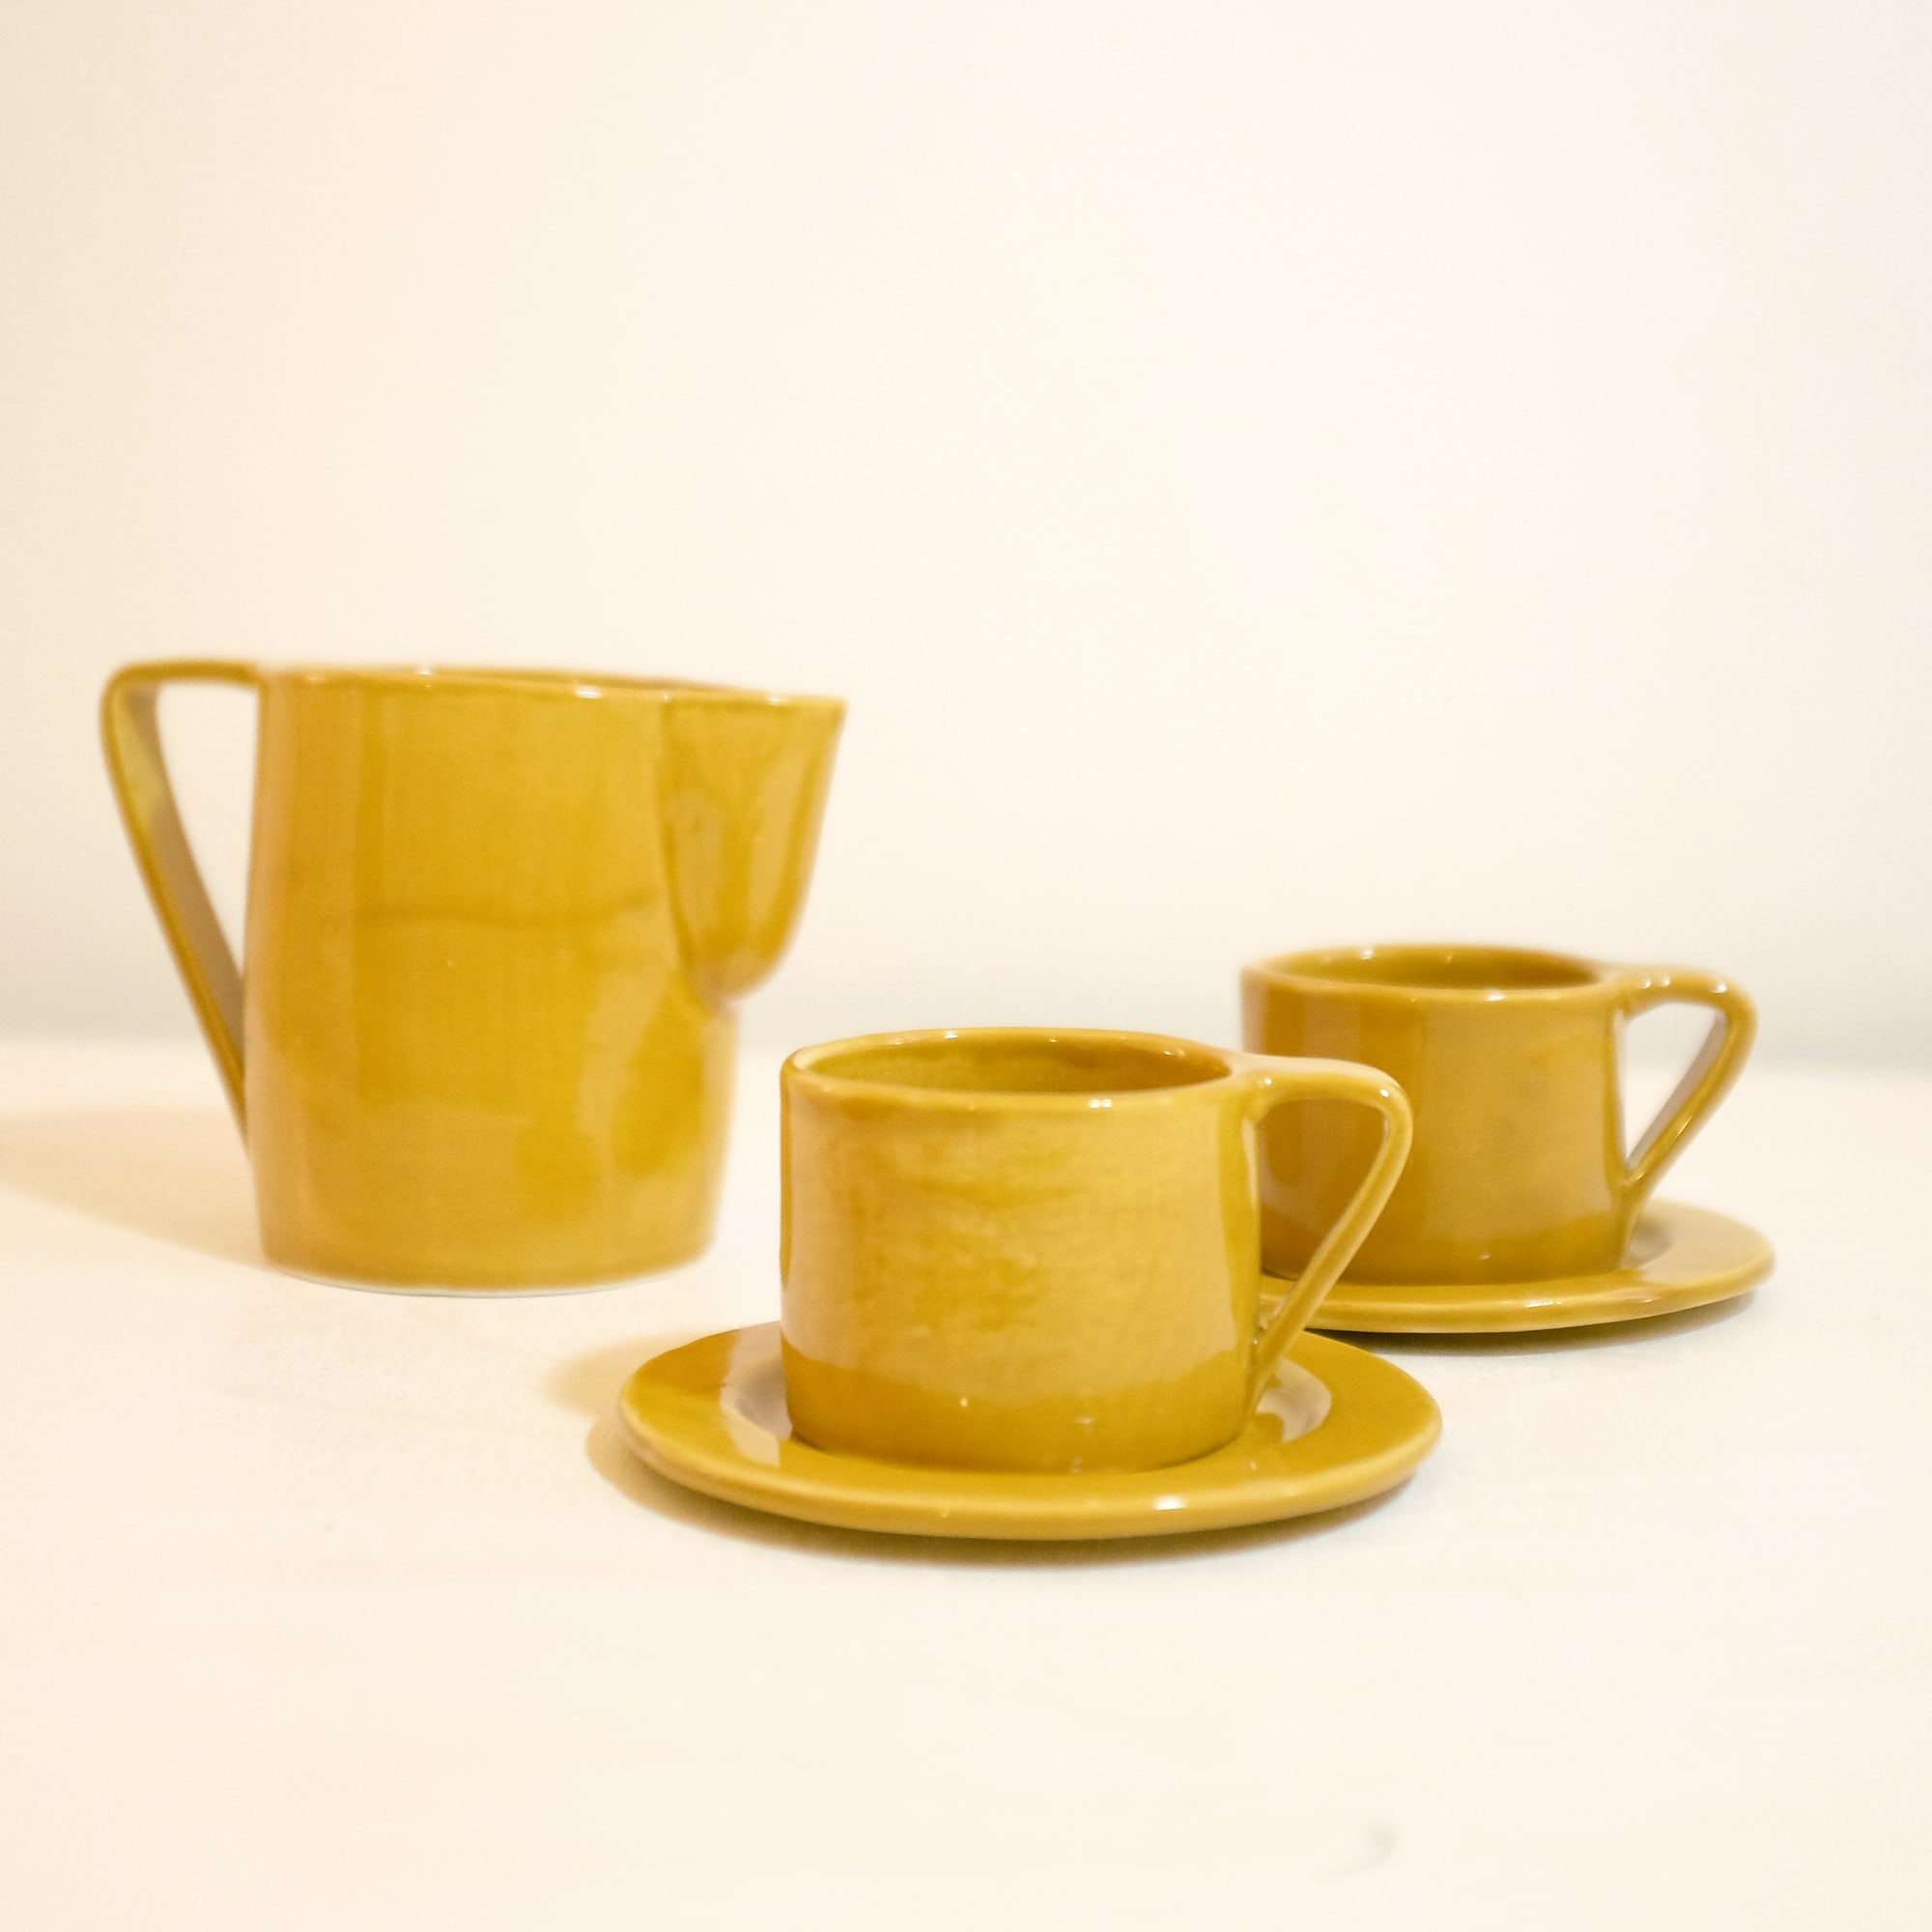 Milano Sole Set of 4 Espresso cups and saucers - Marta Benet